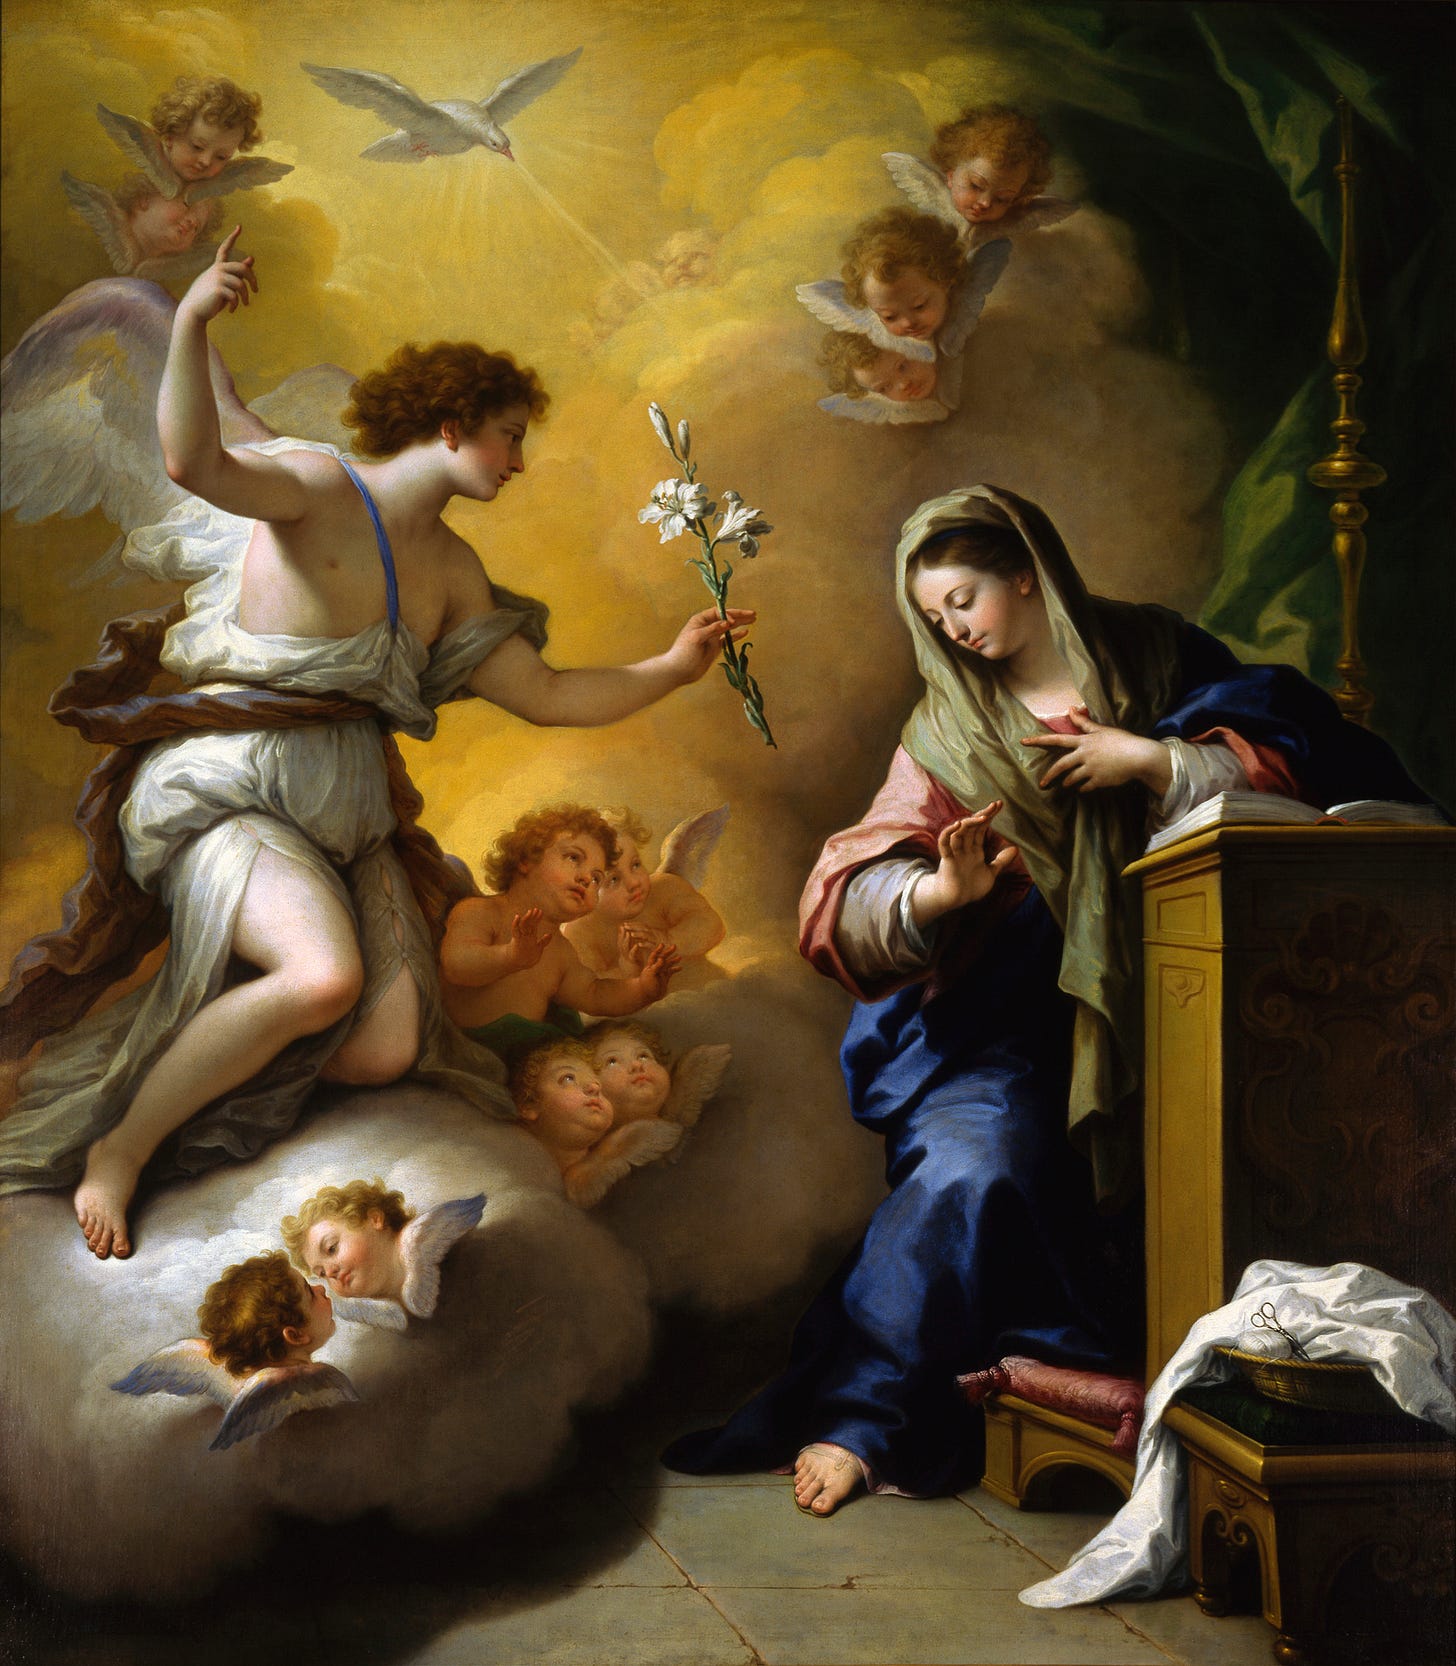 The Annunciation (1712) by Paolo de Matteis (Italian, 1662-1728)